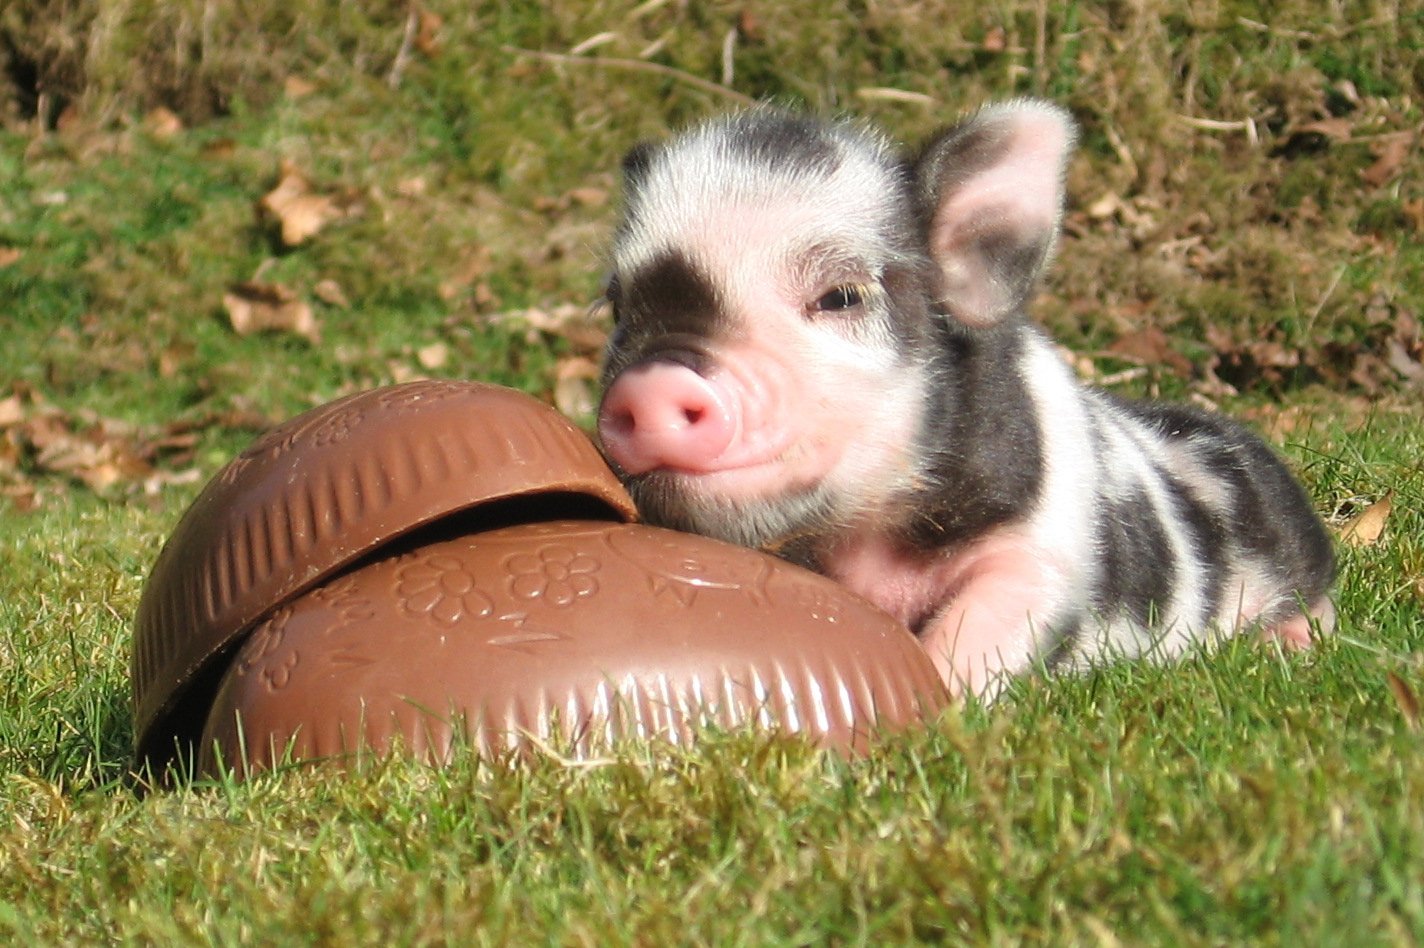 Chocolate Easter egg with a miniature pig